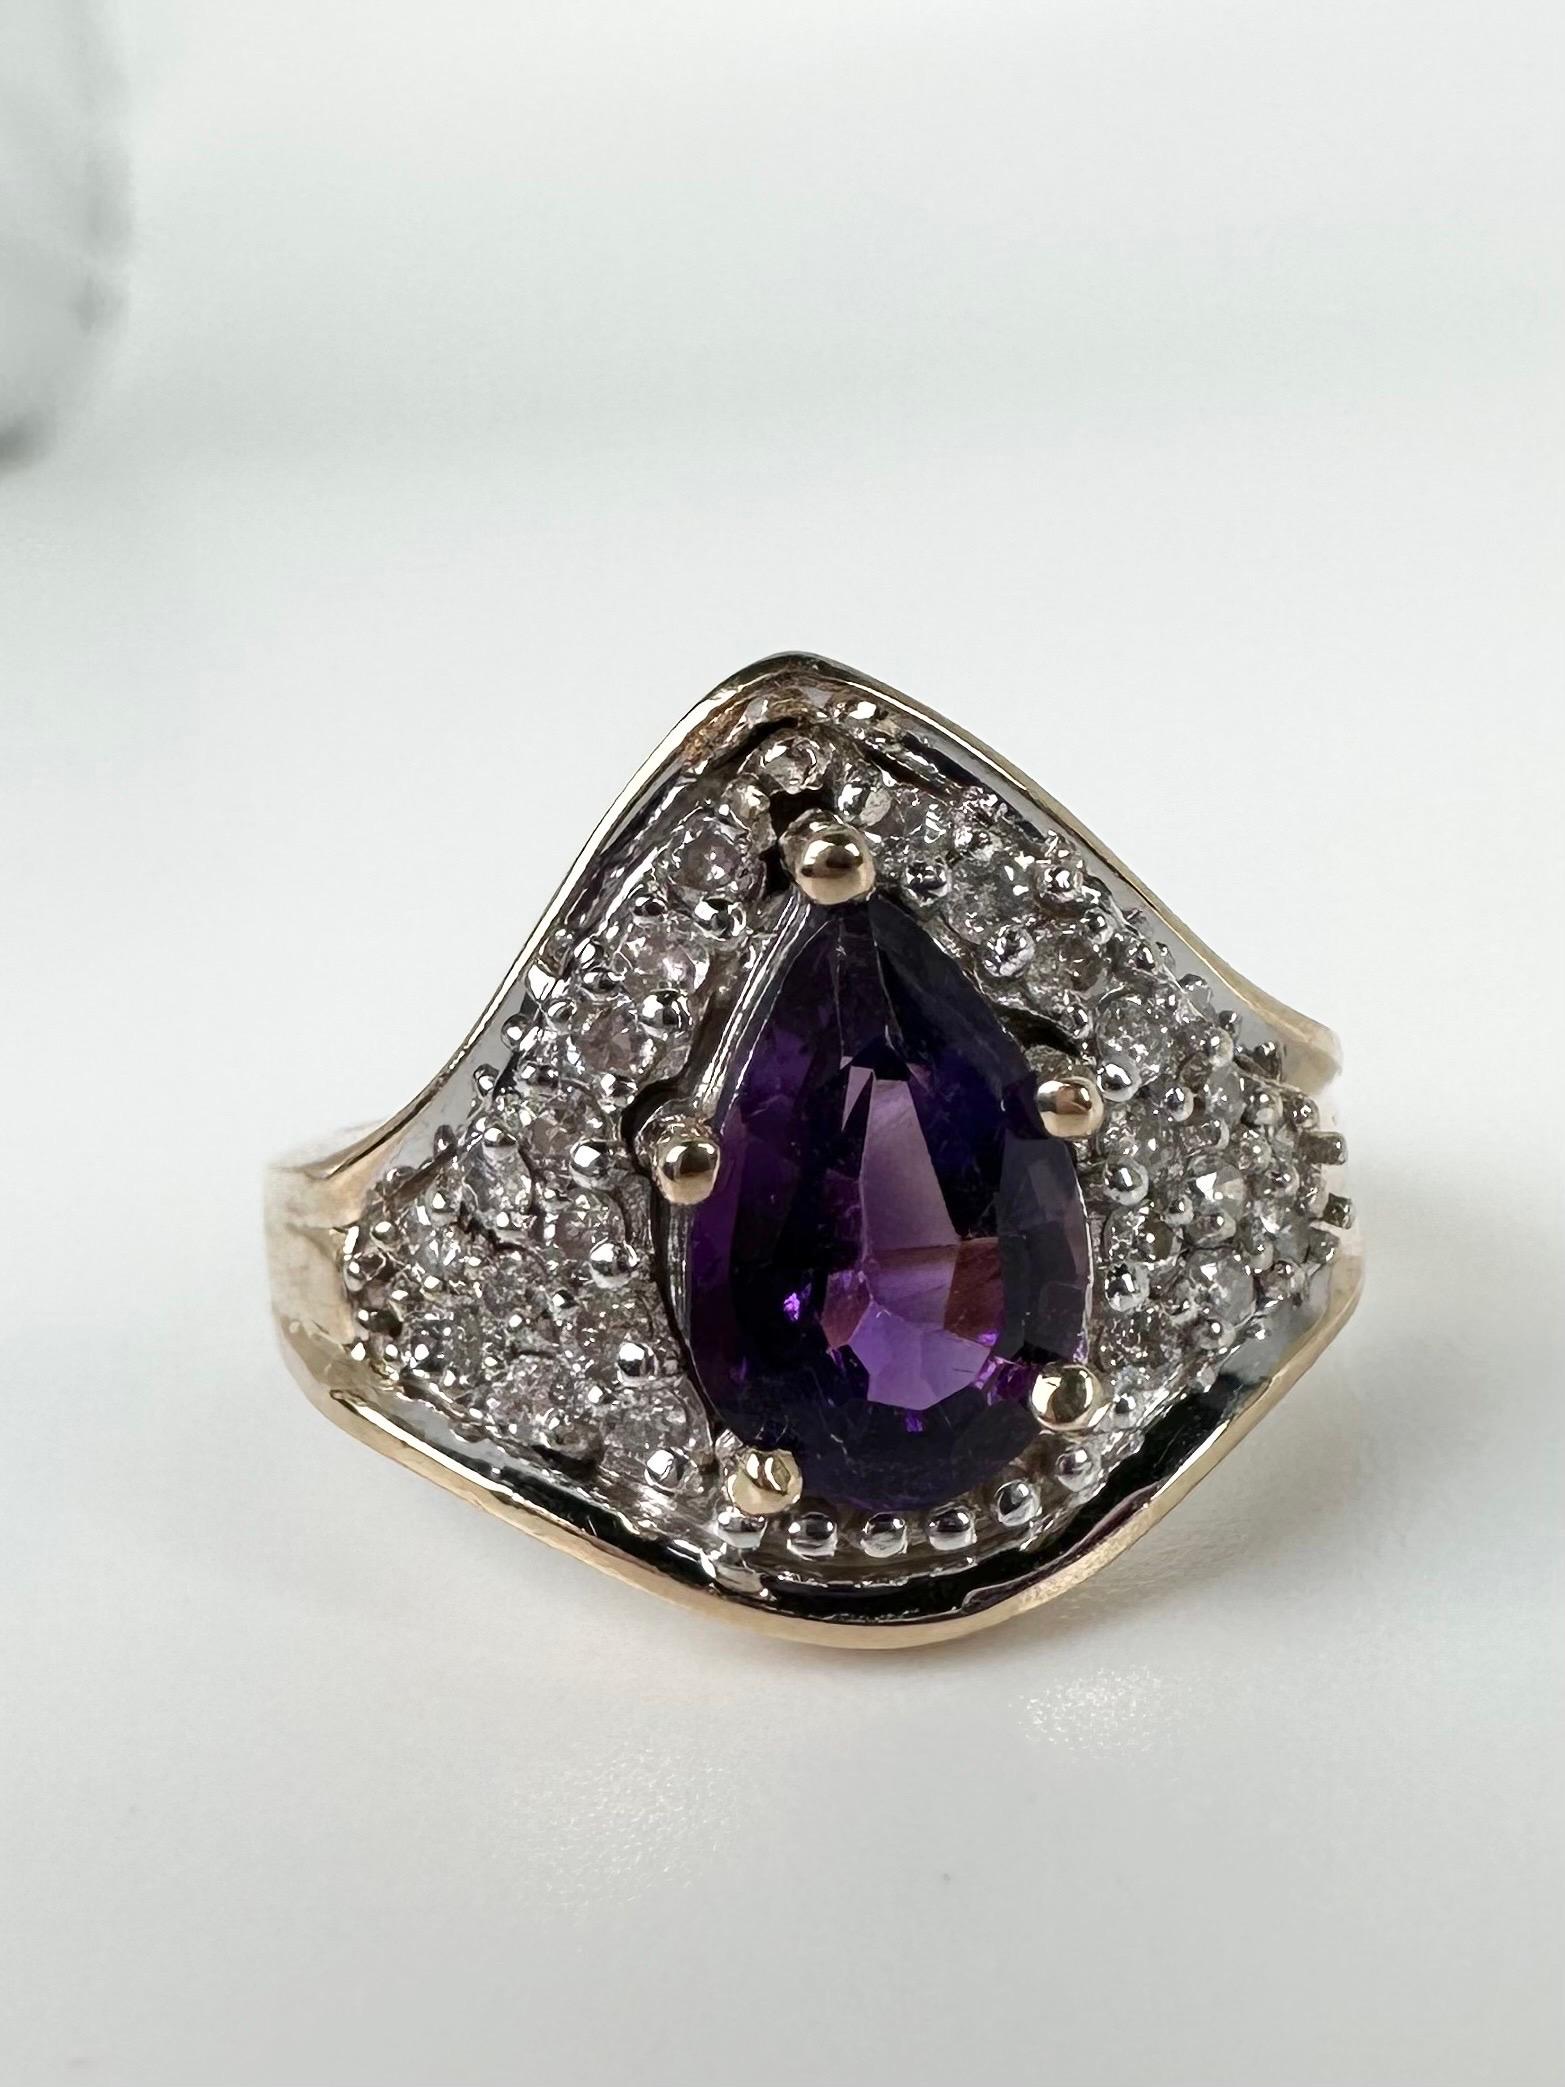 Pave set cocktail ring made in 14KT yellow gold with stunning amethyst and natural diamonds.

GOLD: 14KT gold
NATURAL DIAMOND(S)
Clarity/Color: SI/H
Carat:0.24ct
Cut:Round Brilliant
NATURAL AMETHYST(S)
Clarity/Color: Slightly